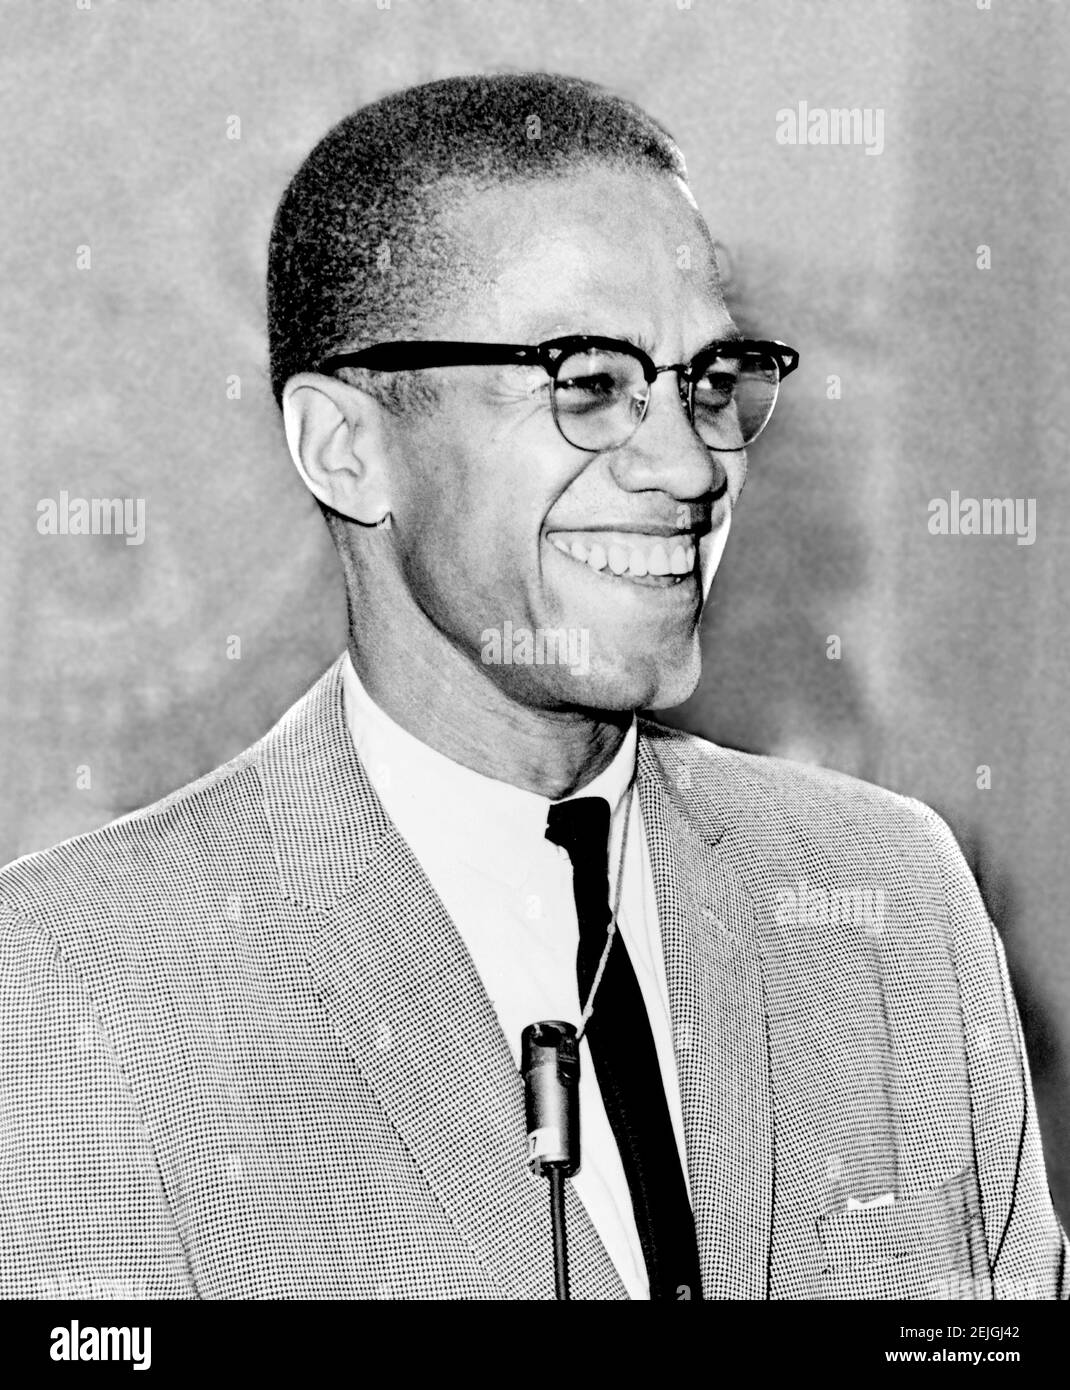 Malcolm X. Portrait of the Muslim human rights activist Malcolm X ( b. Malcolm Little, 1925-1965), 1964 Stock Photo